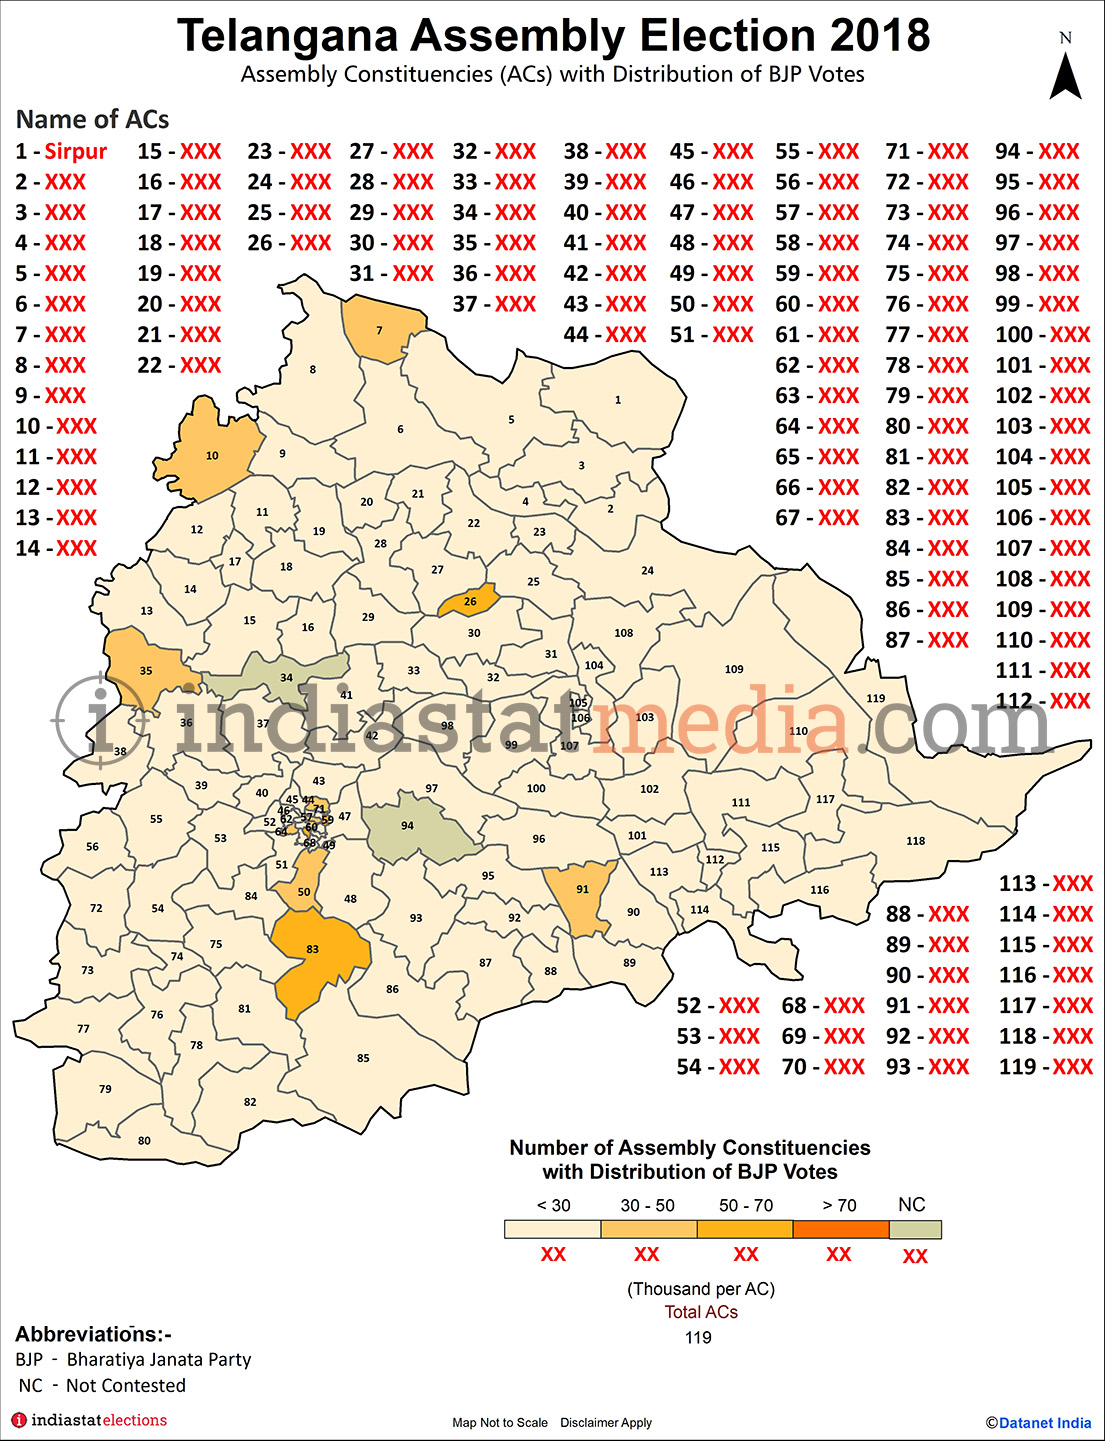 Distribution of BJP Votes by Constituencies in Telangana (Assembly Election - 2018)